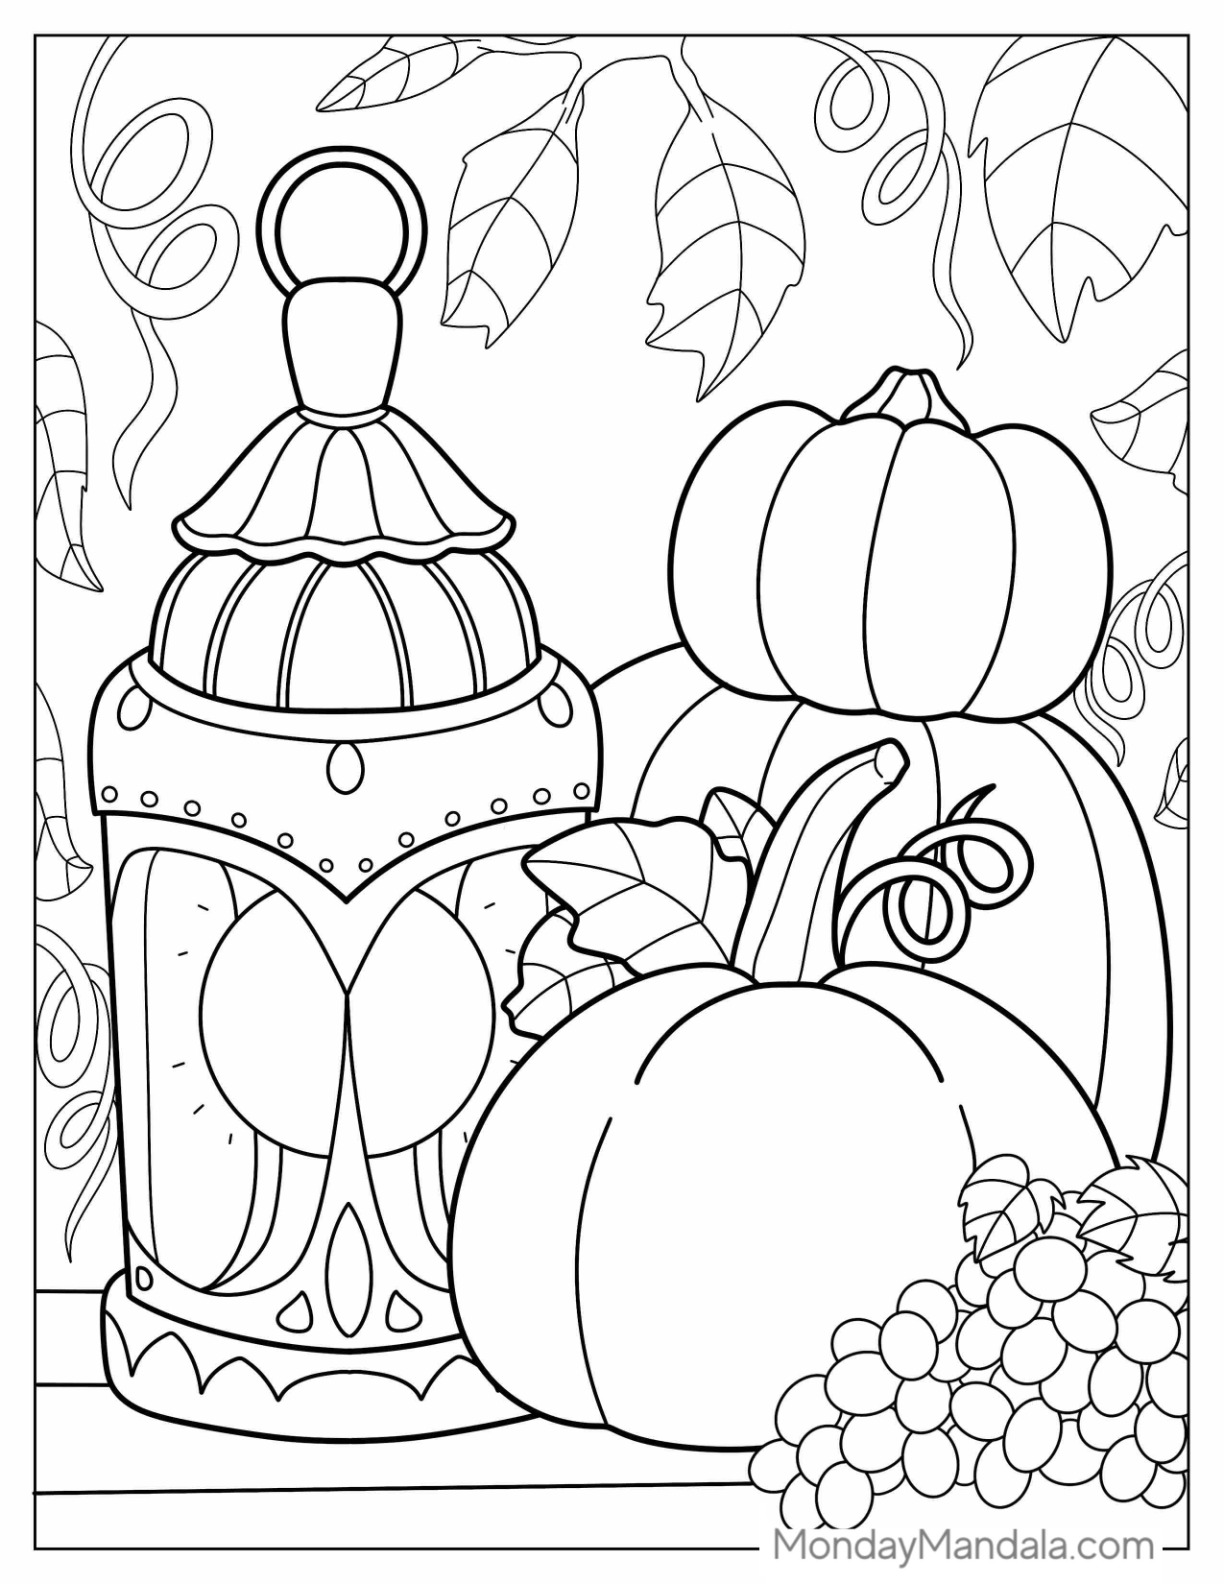 118+ Fruit Baskets Coloring Pages 36